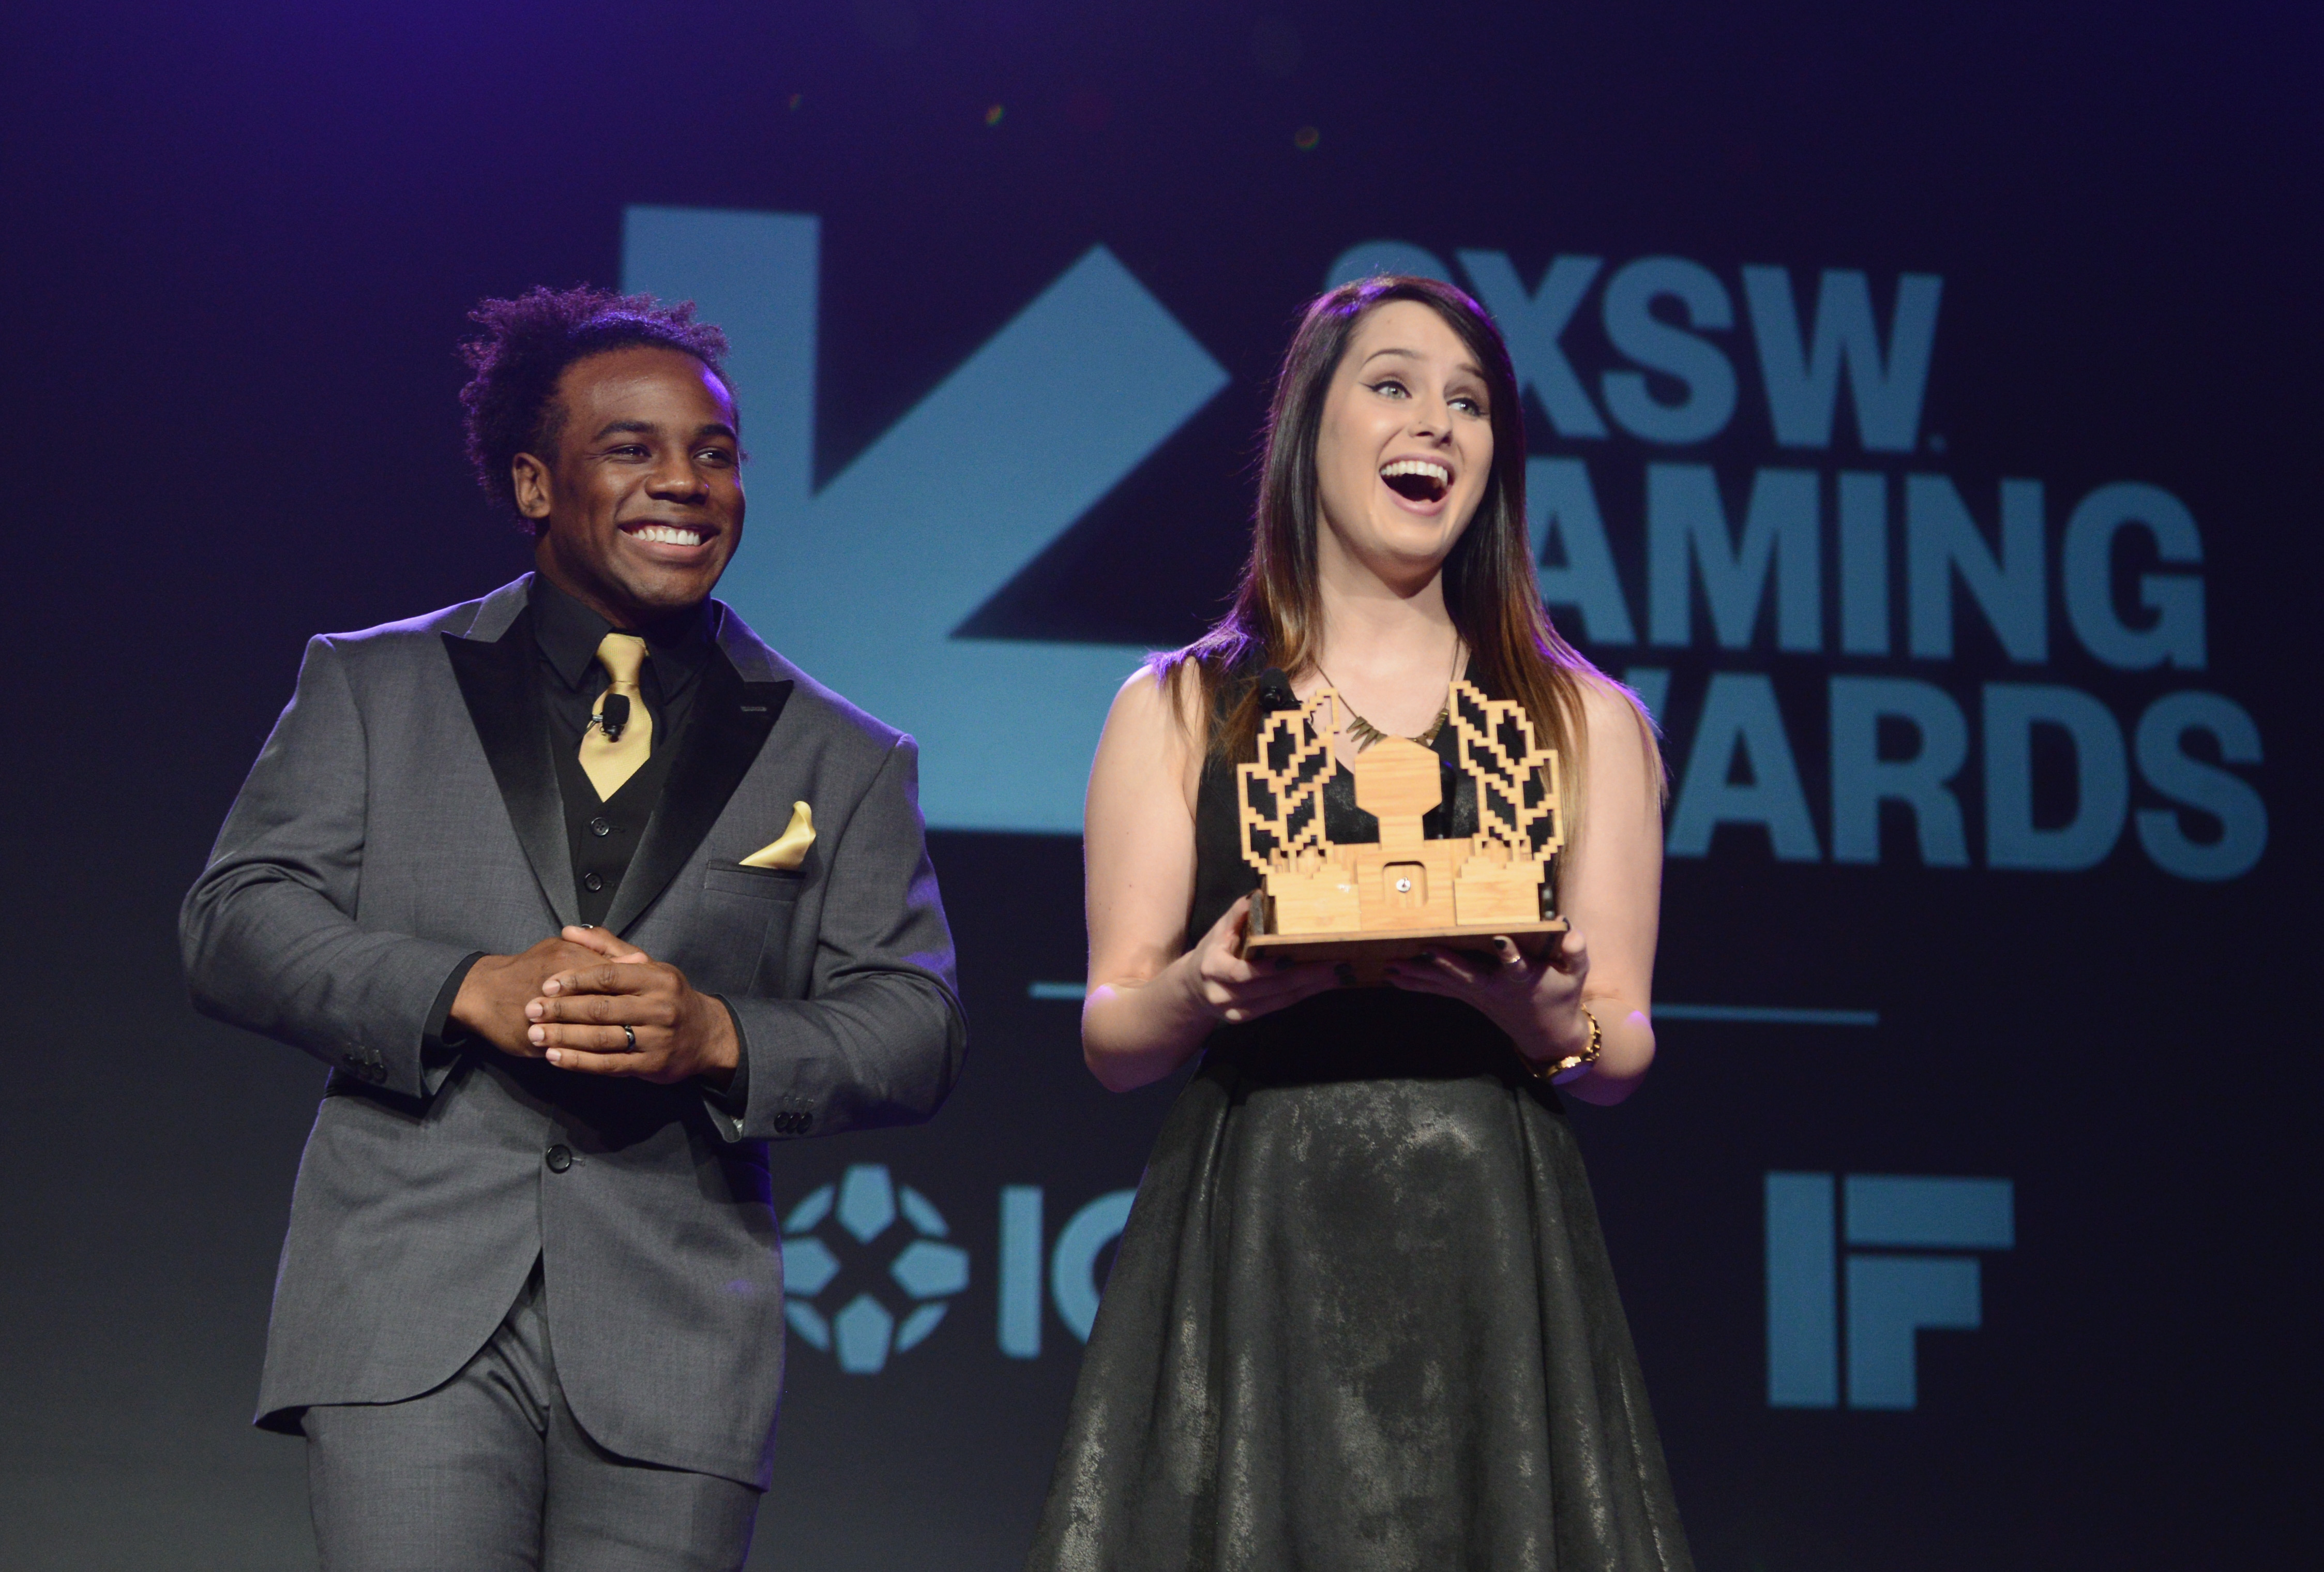 Announcing the 2017 SXSW Gaming Awards Winners